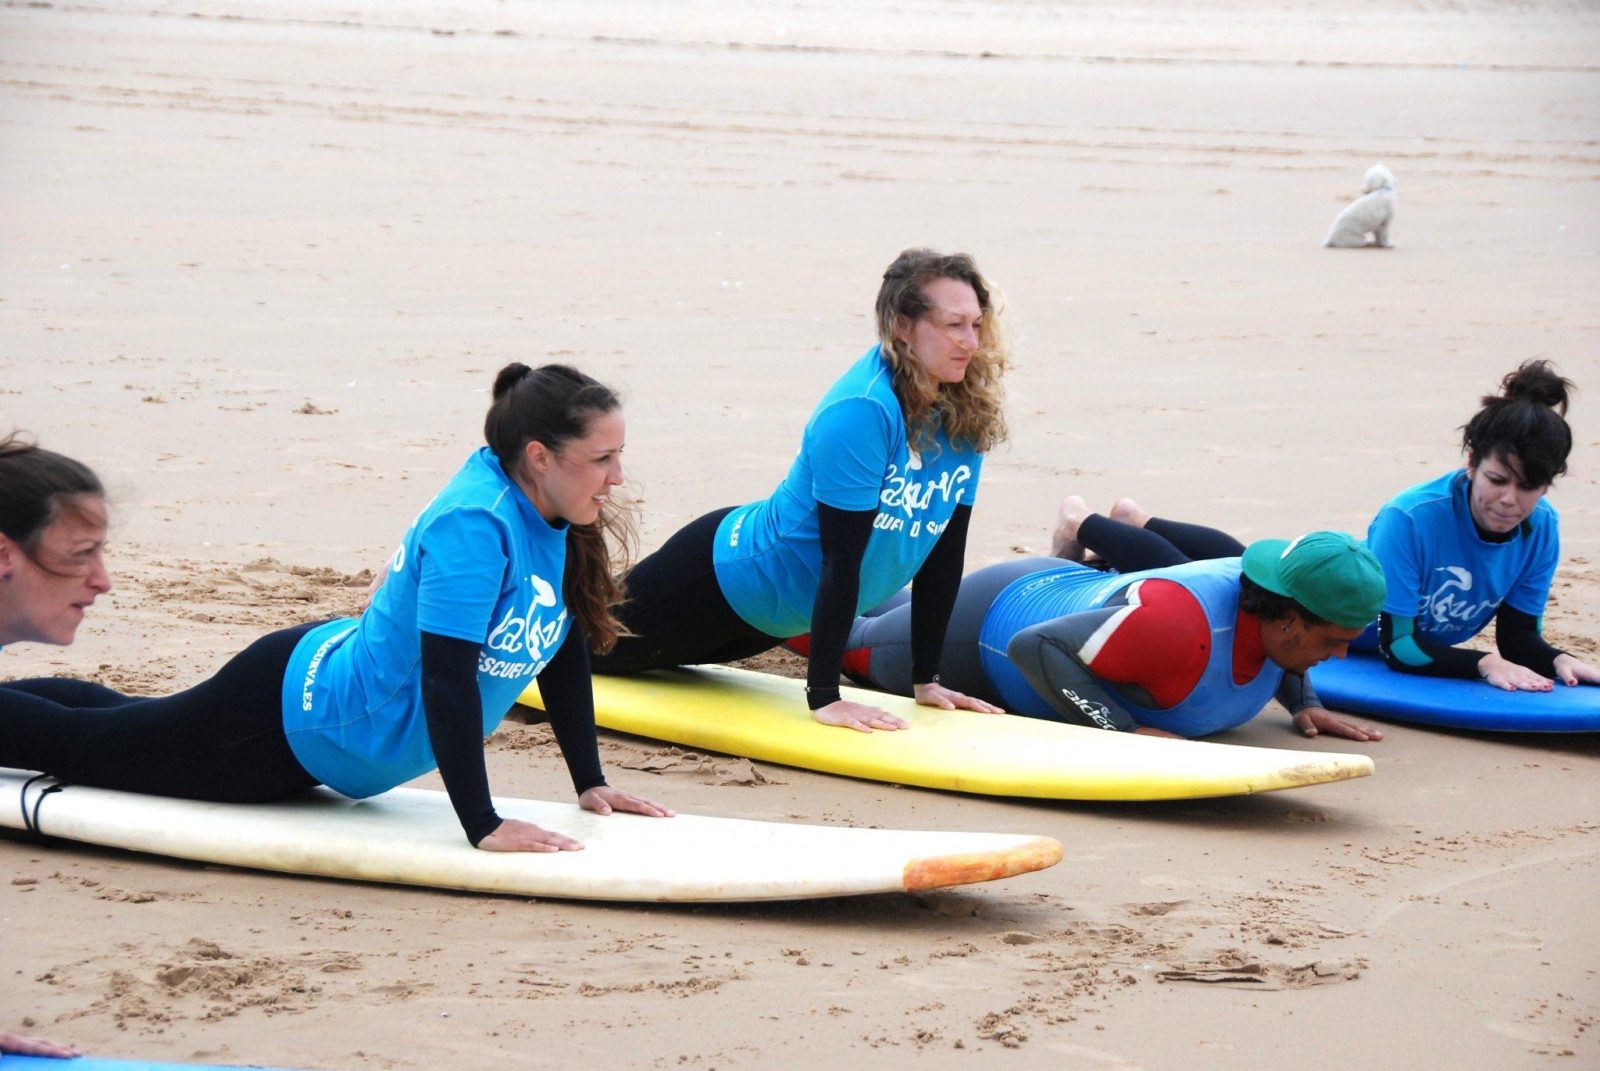 Surf Camp Spain | What it's like at Surfing School Spain